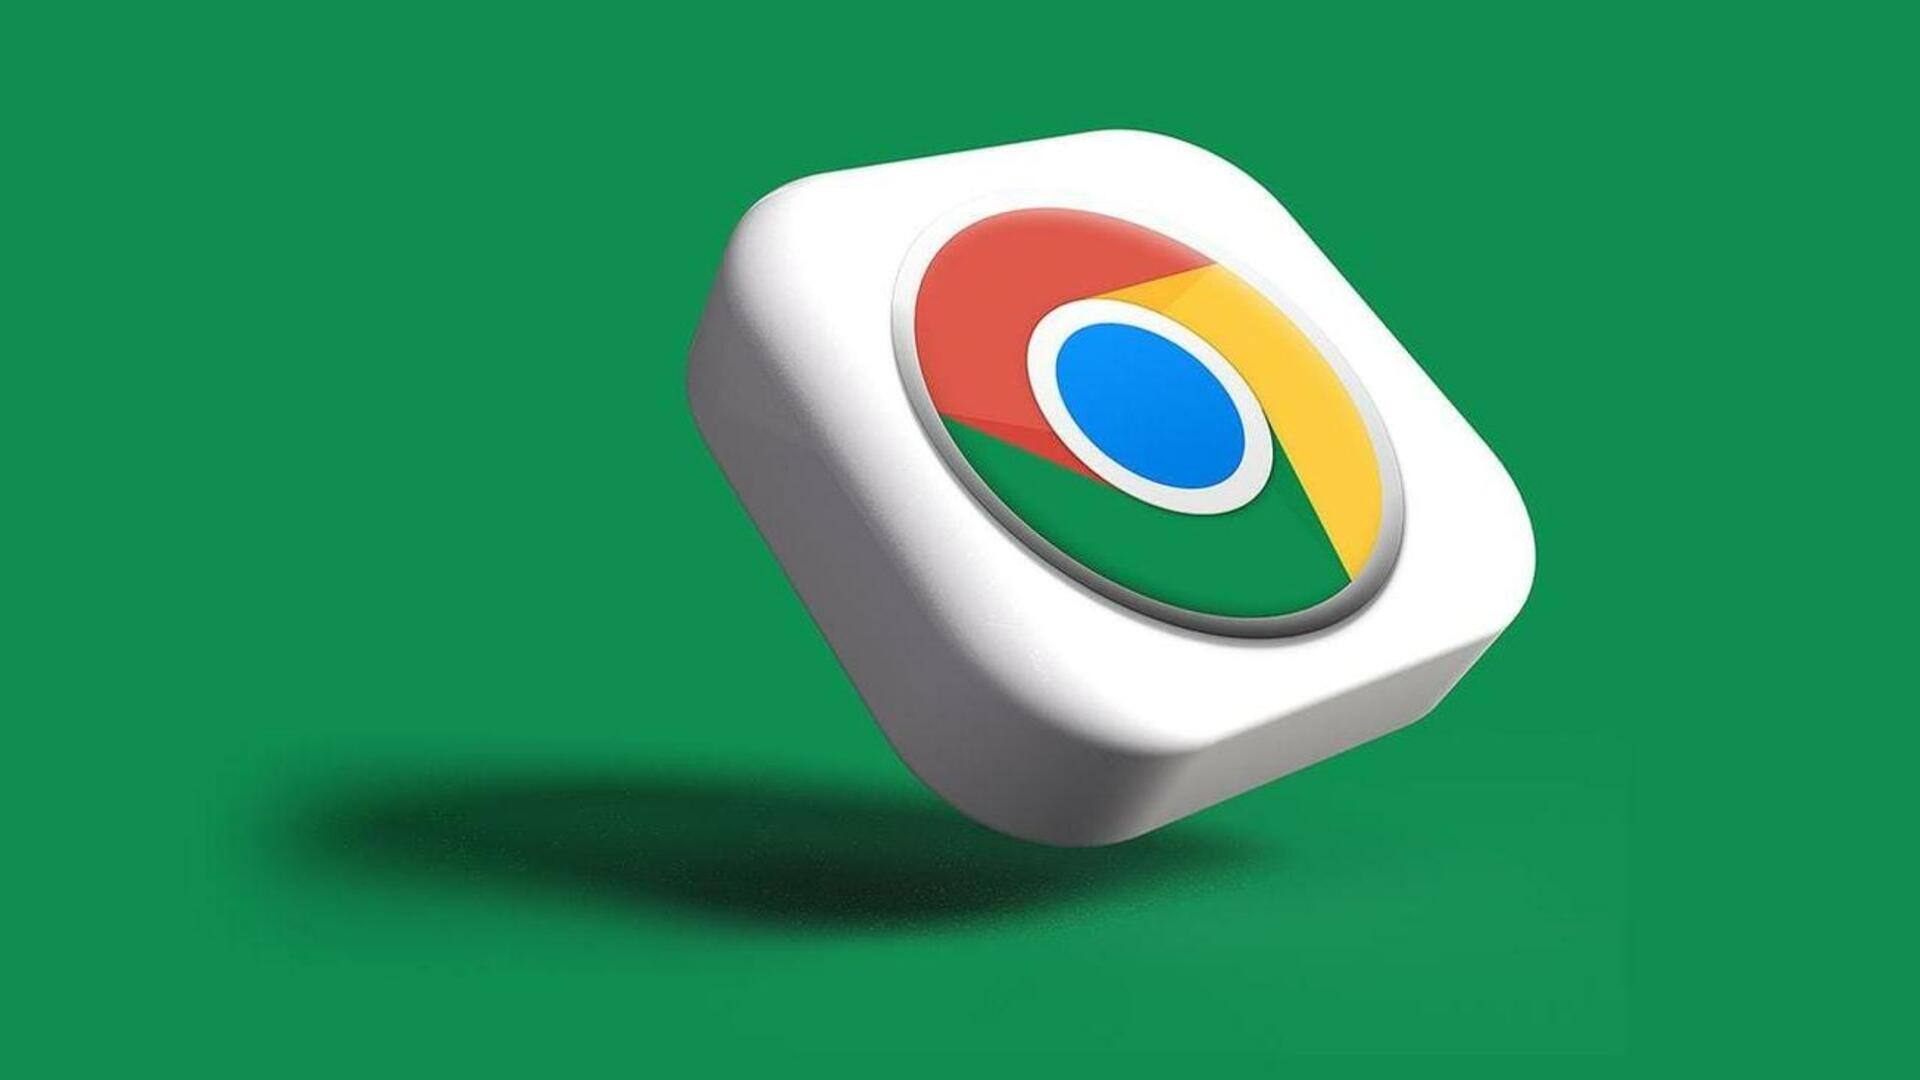 New Google Chrome features will help you save time